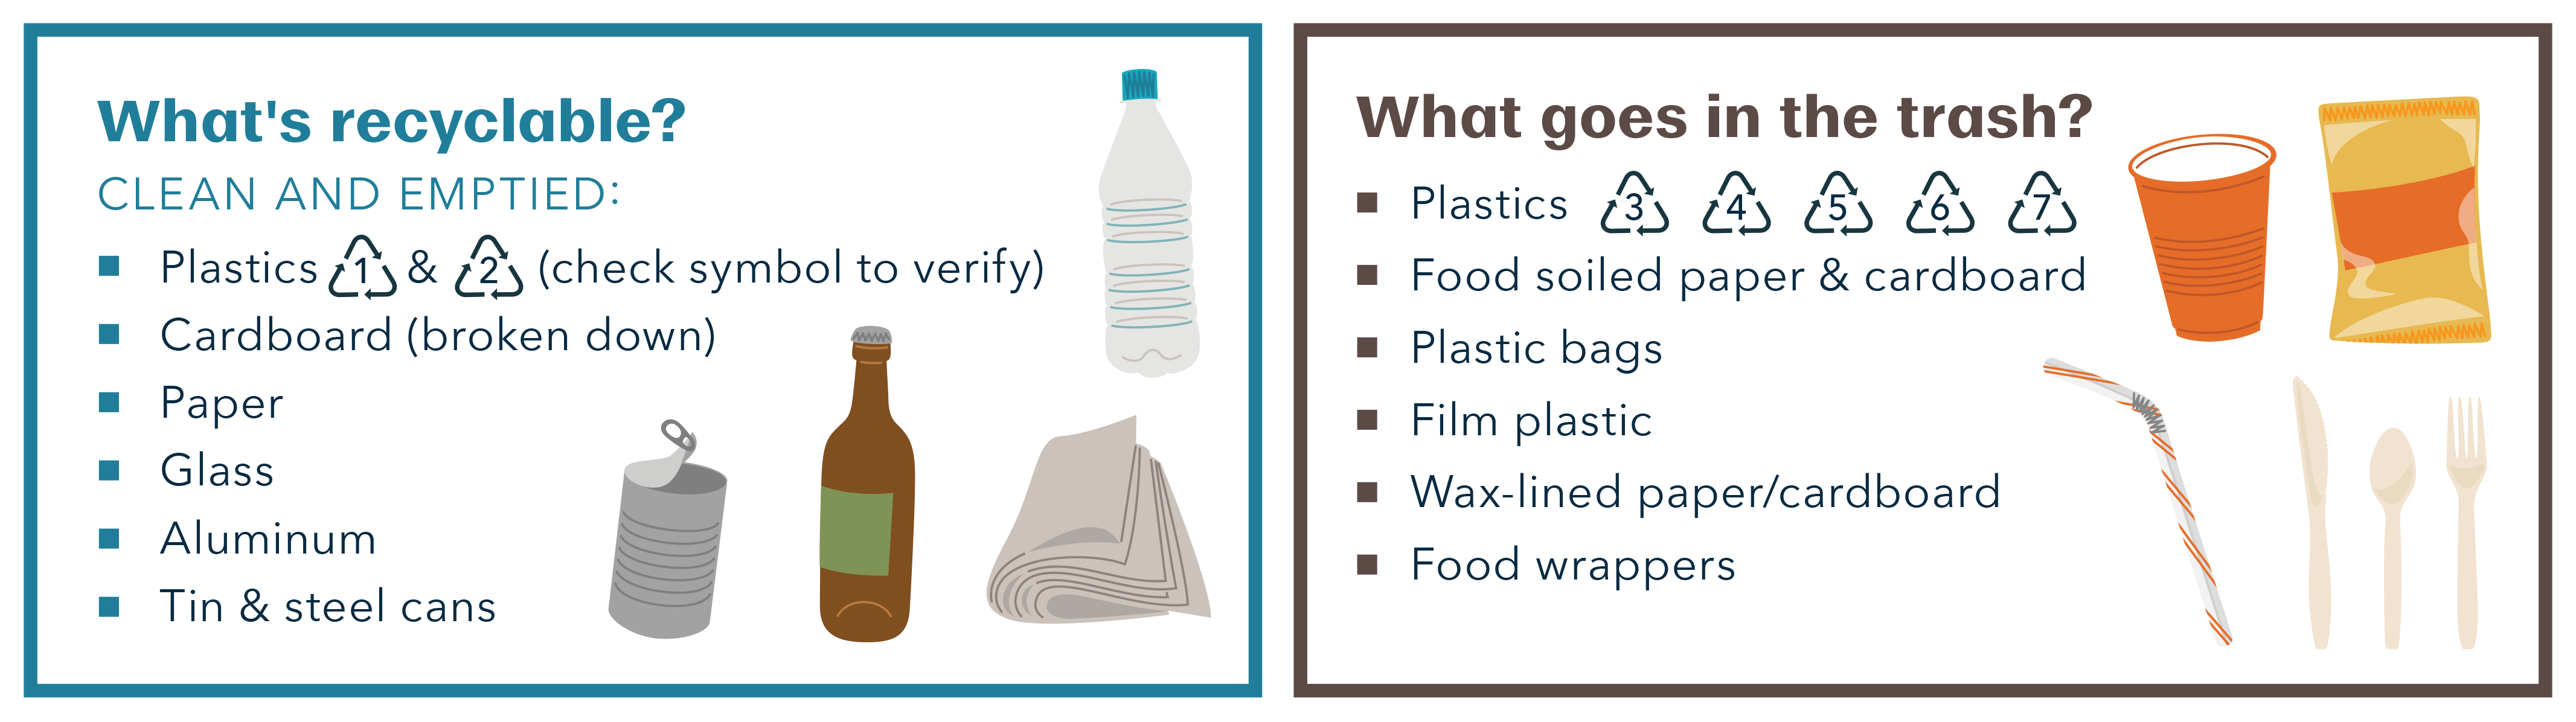 What's recyclable and what goes in the trash graphic